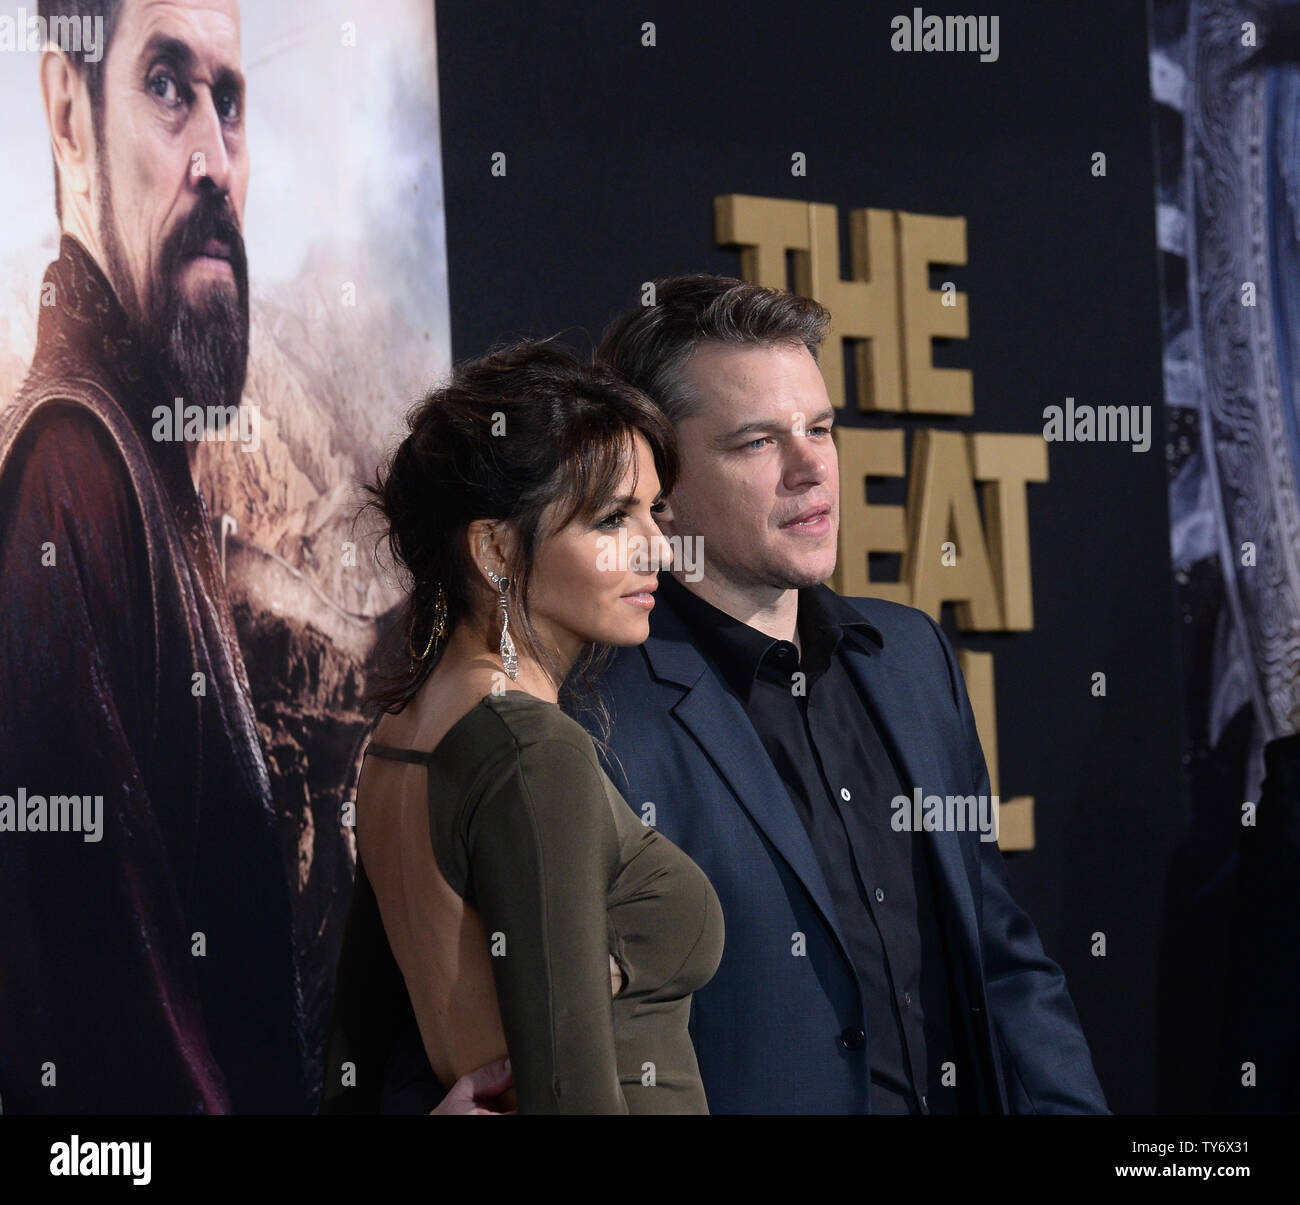 Cast Member Matt Damon And His Wife Luciana Barroso Attend The Premiere Of The Motion Picture Fantasy Thriller The Great Wall At The Tcl Chinese Theatre In The Hollywood Section Of Los